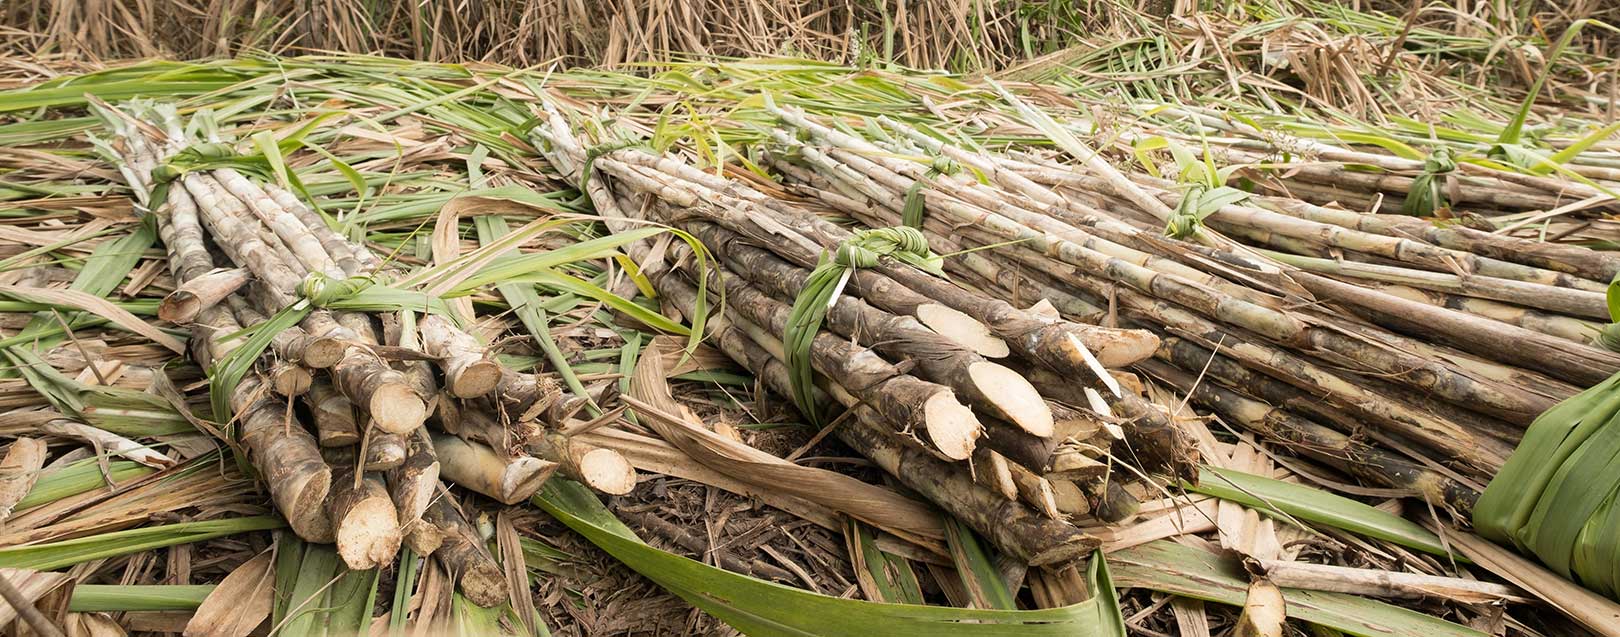 Govt increases sugarcane’s fair price by Rs. 25/quintal to Rs. 255